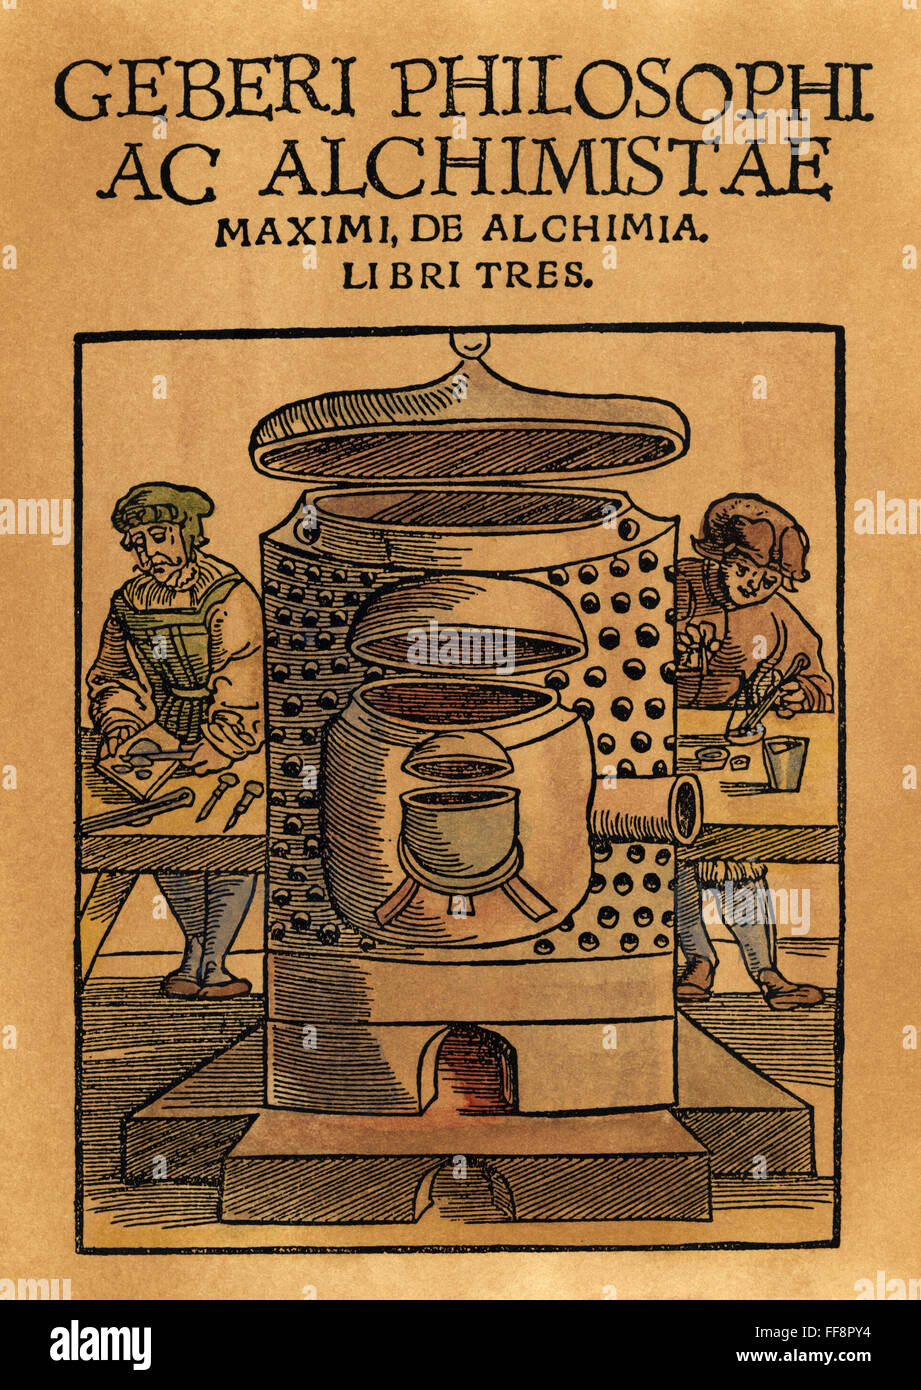 ALCHEMISTS, 1529. /nAlchemists at work in a laboratory. Title page from the Arab scholar Geber's (or Jabir) three volume philosophy of alchemy, 8th century, printed in 1529 at Strassburg, Germany. Stock Photo